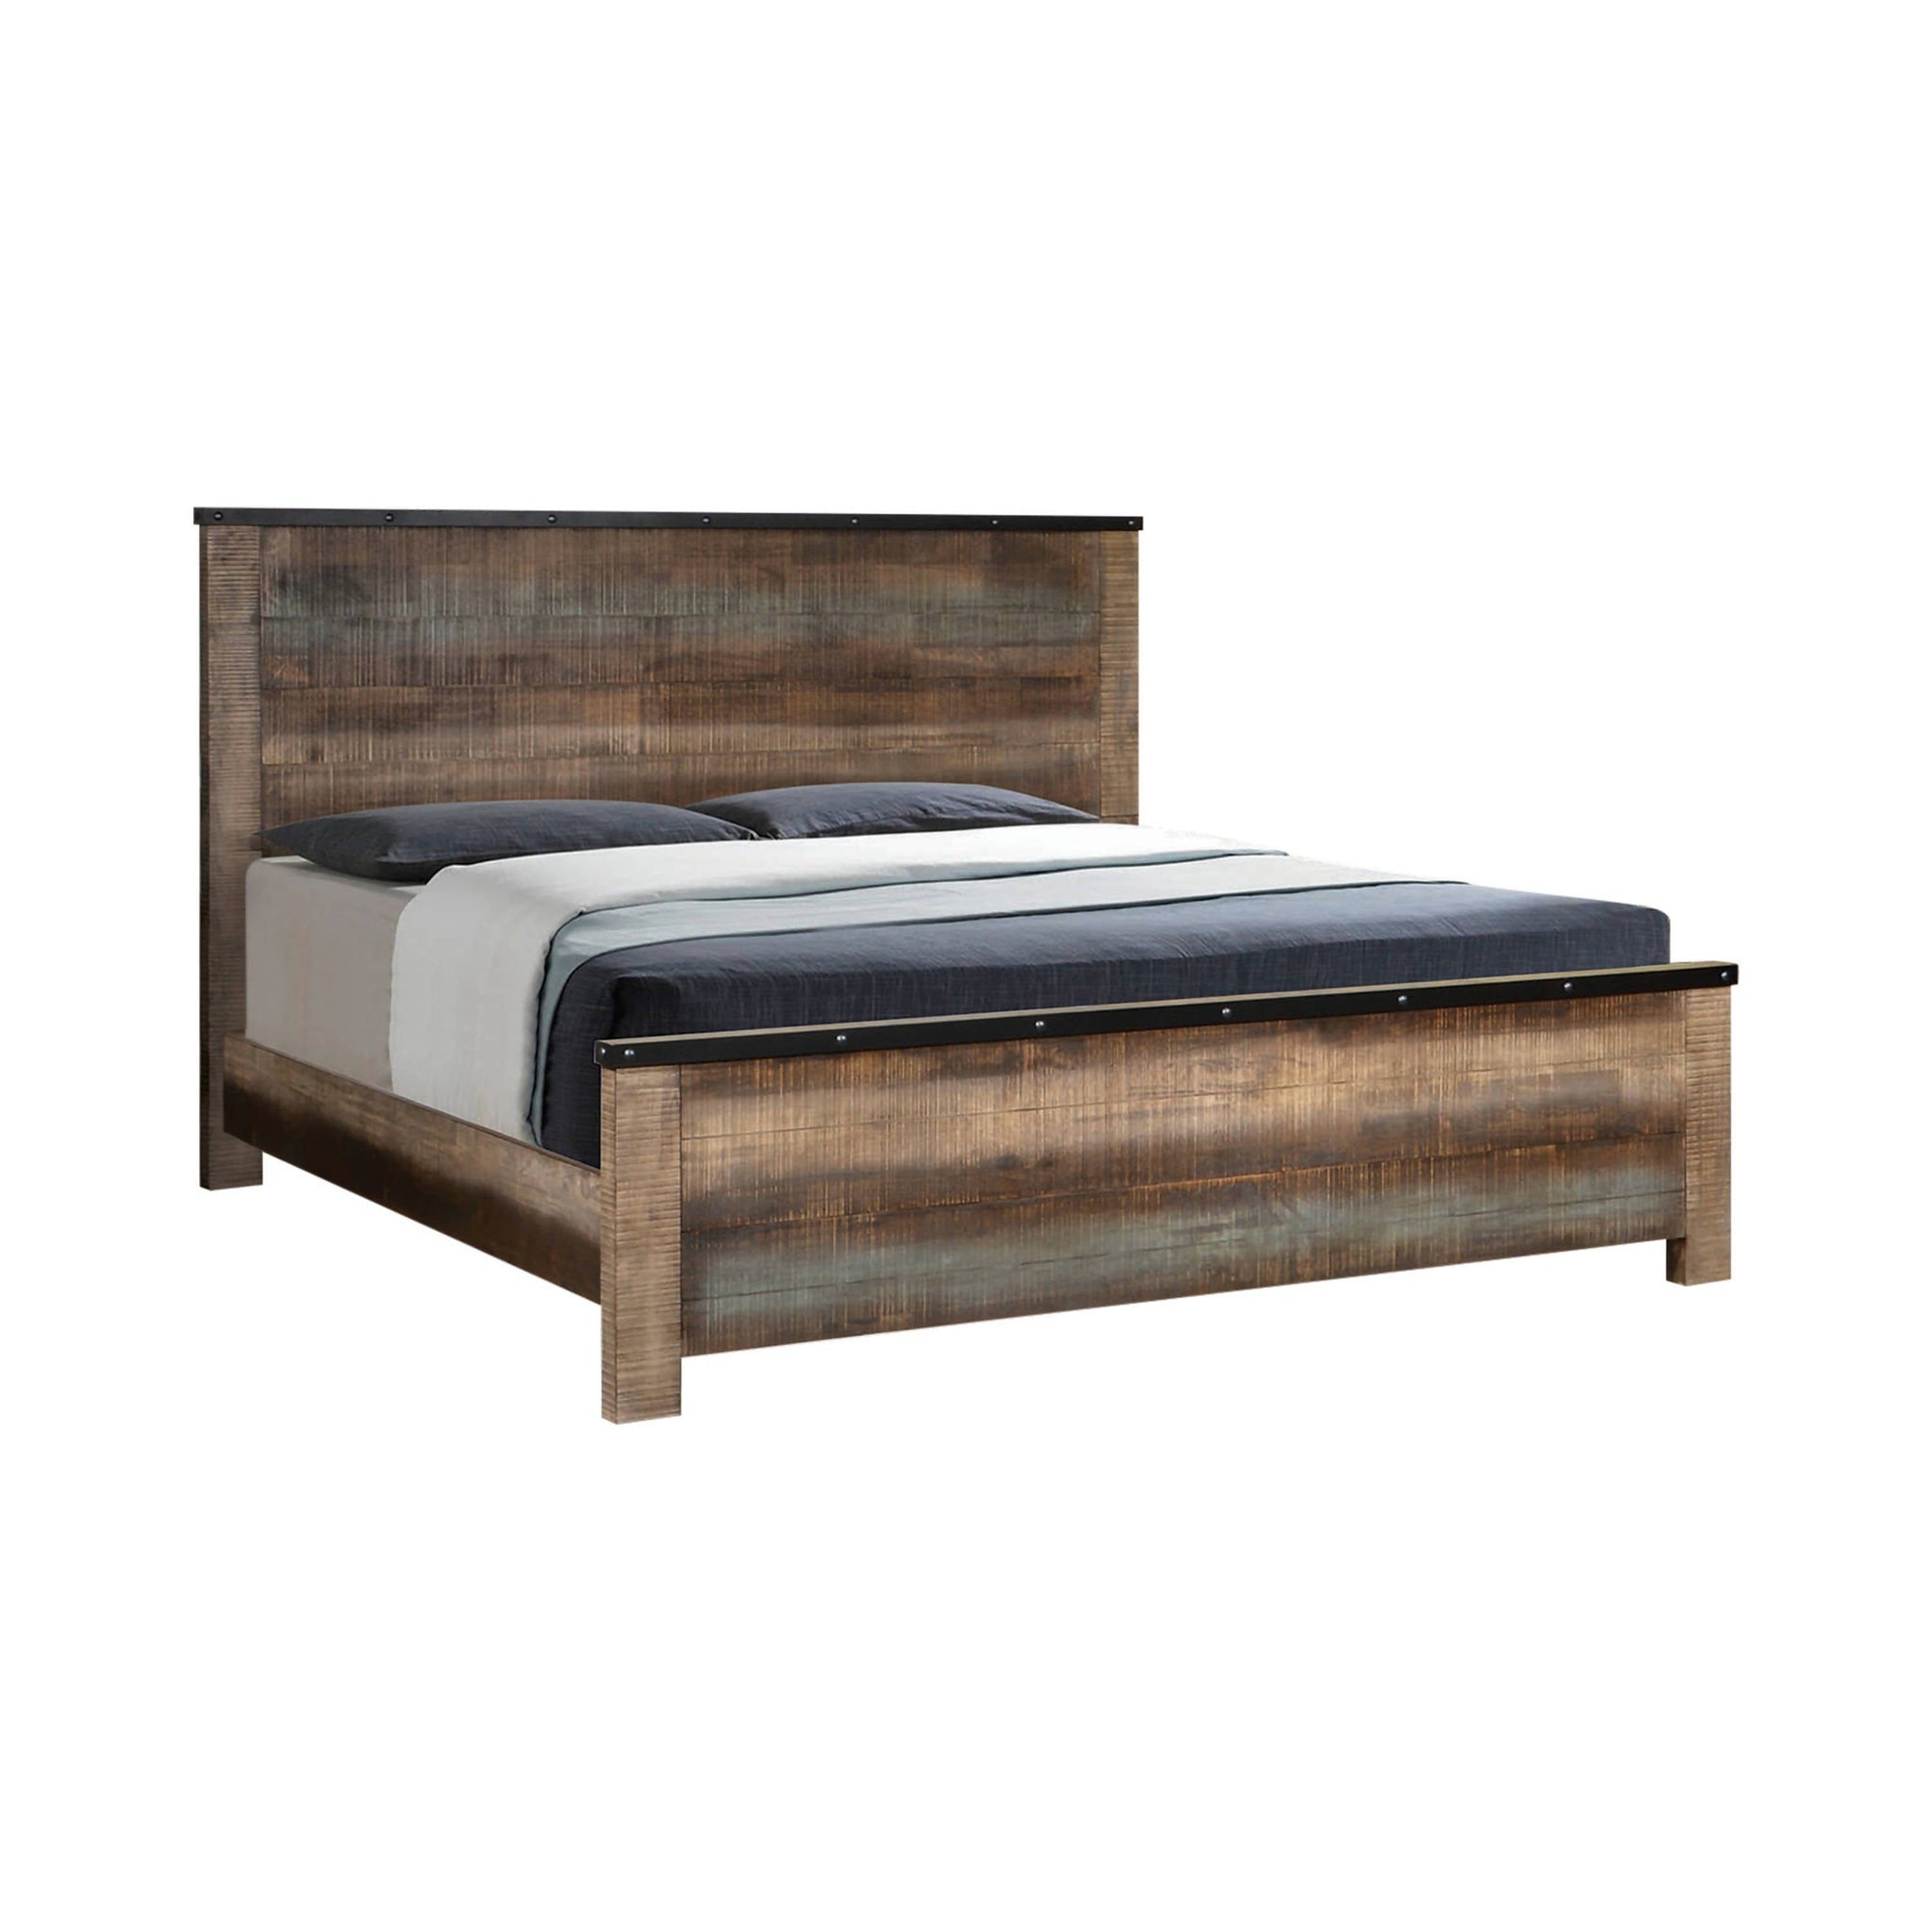 Sembene Eastern King Panel Bed Antique Multi-Color Collection: This Bed Is Exquisitely Crafted With Clean, Crisp Lines That Are Anything But Simple. This Remarkable Bed Is A Sure To Be The Centerpiece Of The Home.  SKU: 205091KE